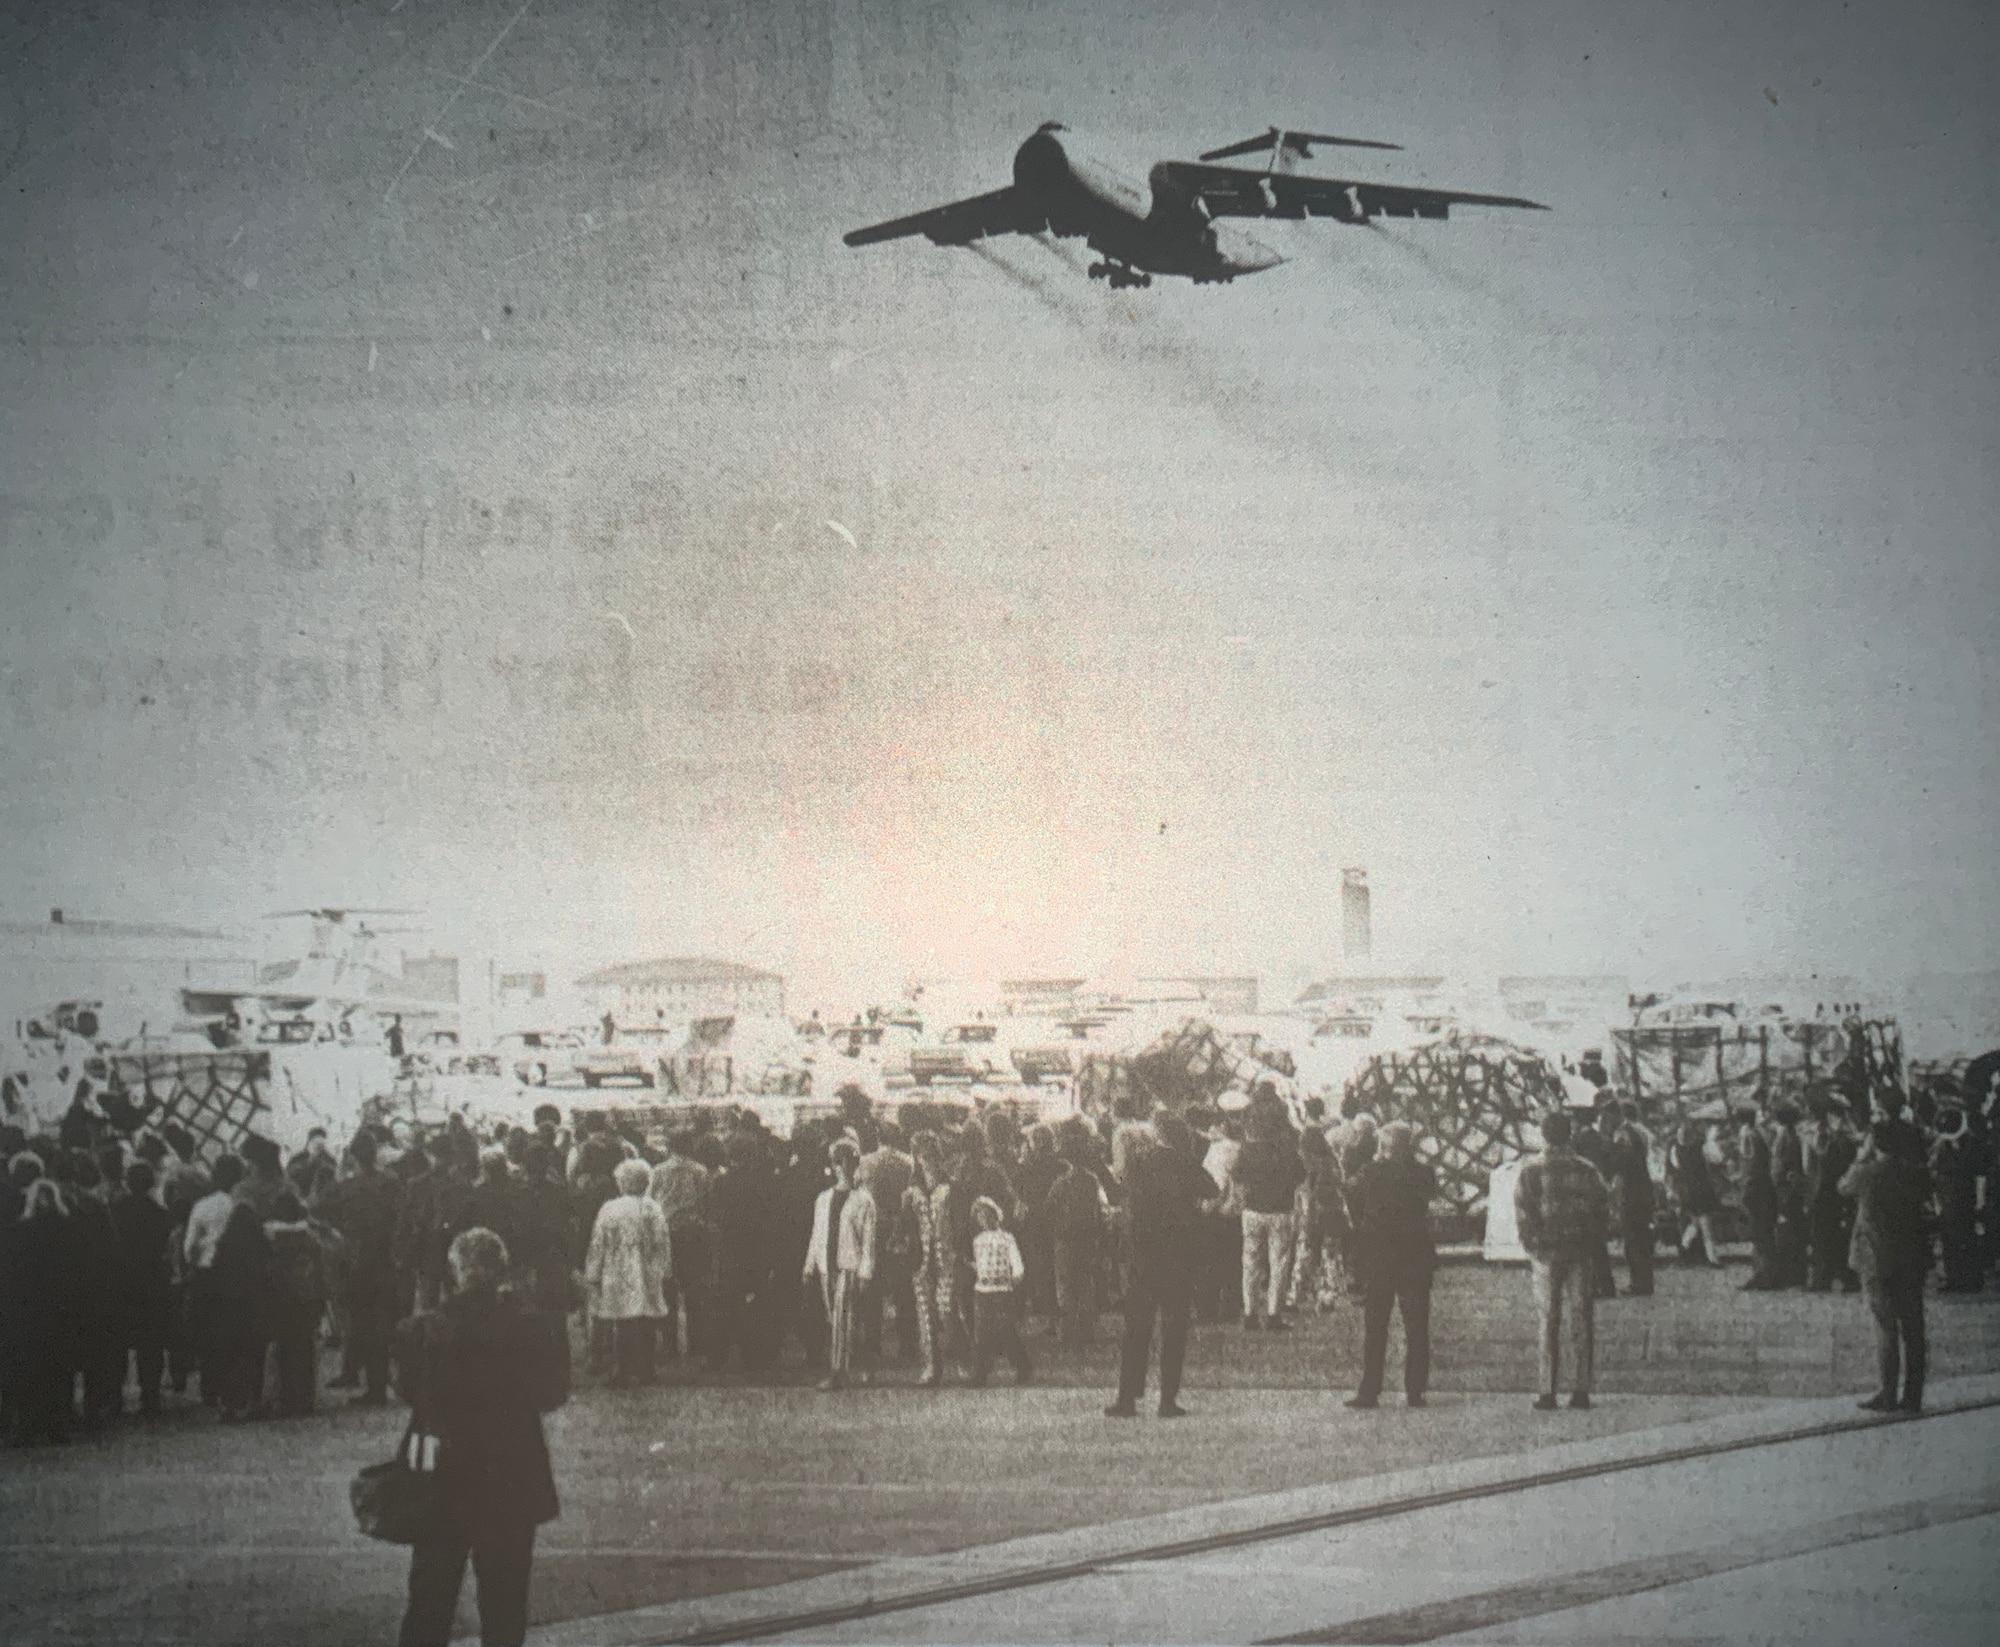 A very old image with a crowd in front and in the top of the image you can see a C-5 with its landing gears open about to land on the flight line.